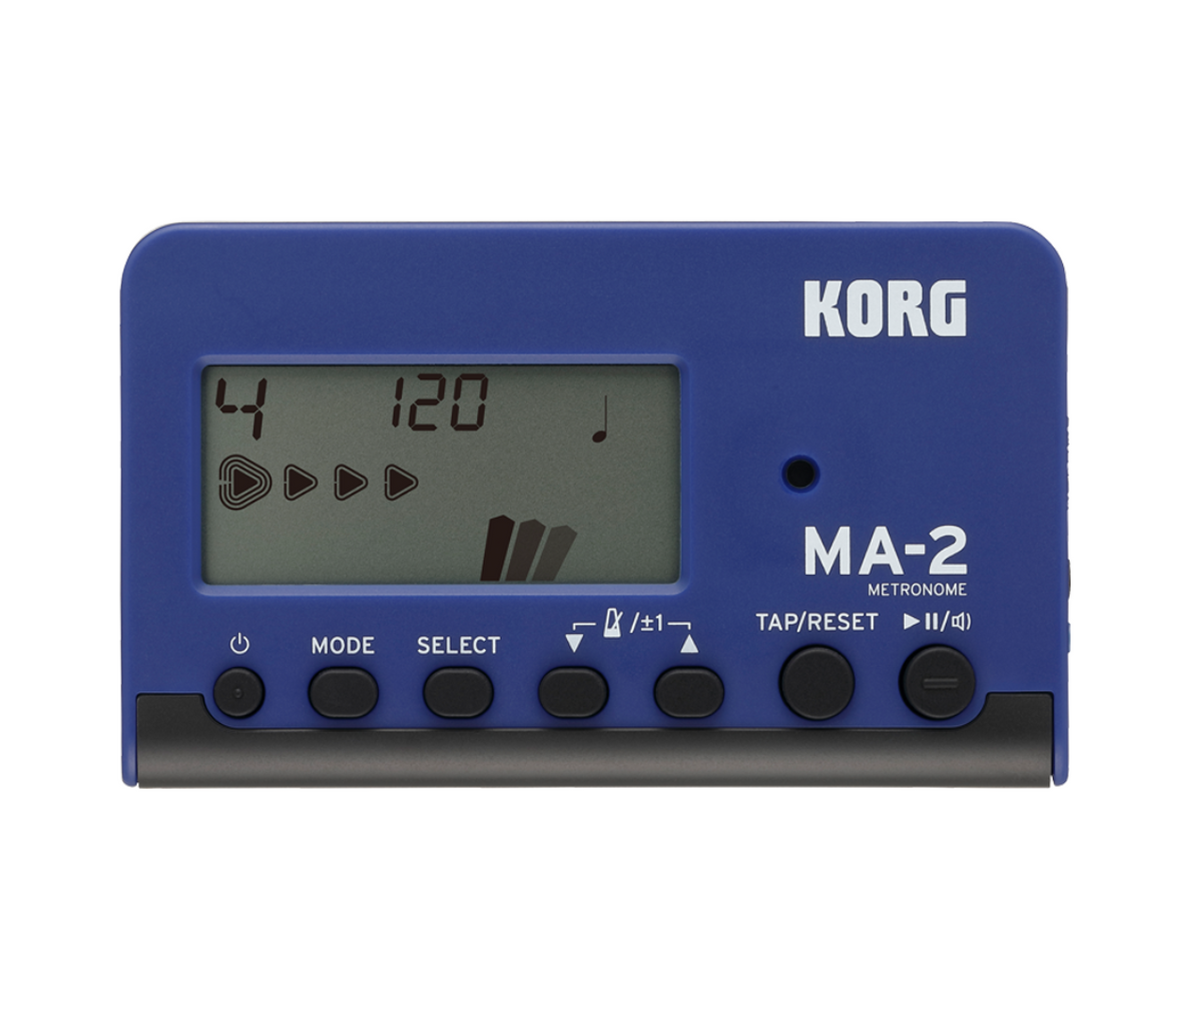 KORG MA-2 Best Metronome MA-2-BLBK (Blue Black) Enhanced Volume and Crisp Sound for Easier Detection with Timer Mode and Sound Out Mode